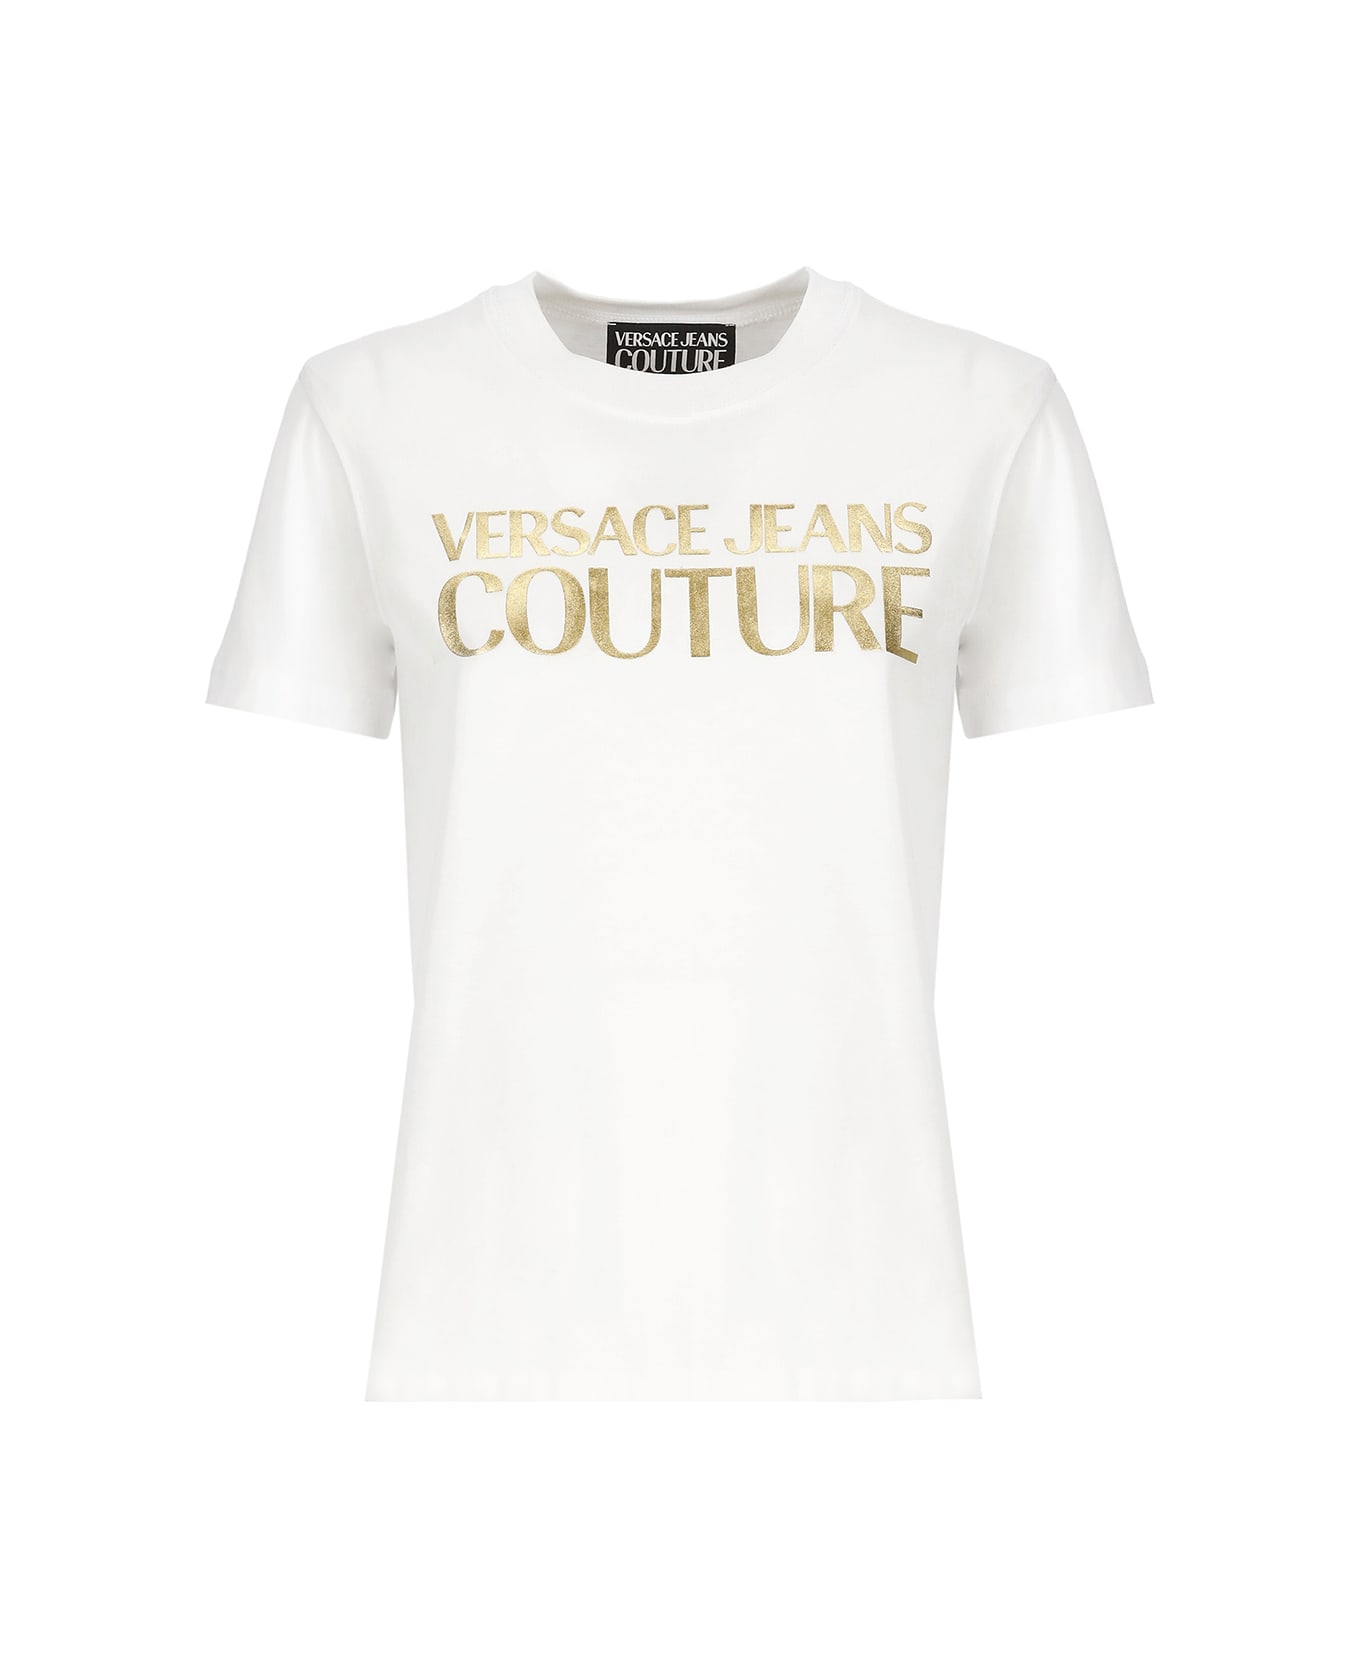 Versace Jeans Couture Logo Printed Crewneck T-shirt - White